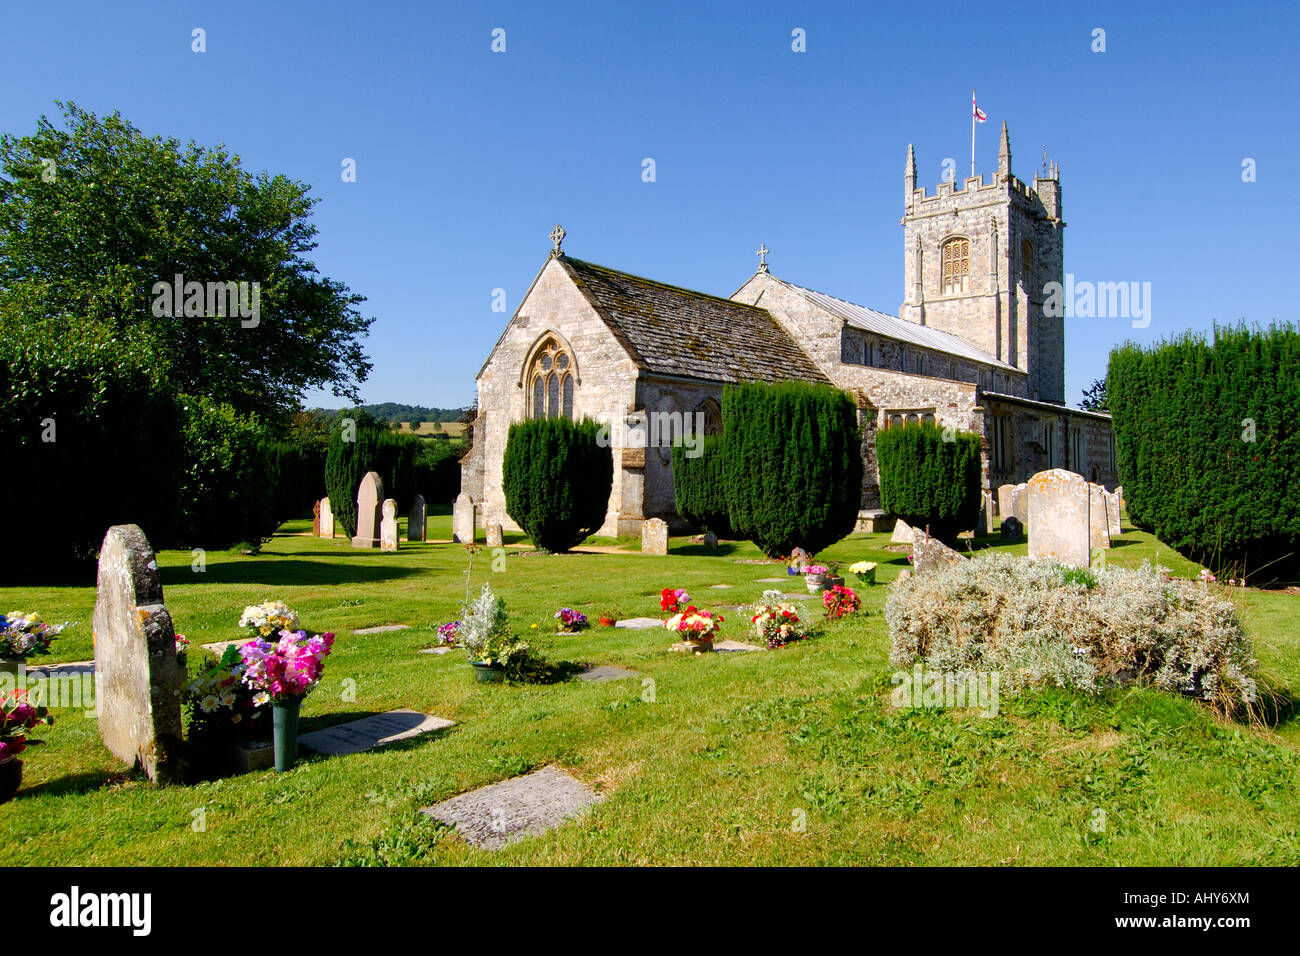 The historically unique Church of St John the Baptist Bere Regis Dorset England on a bright sunny afternoon Stock Photo